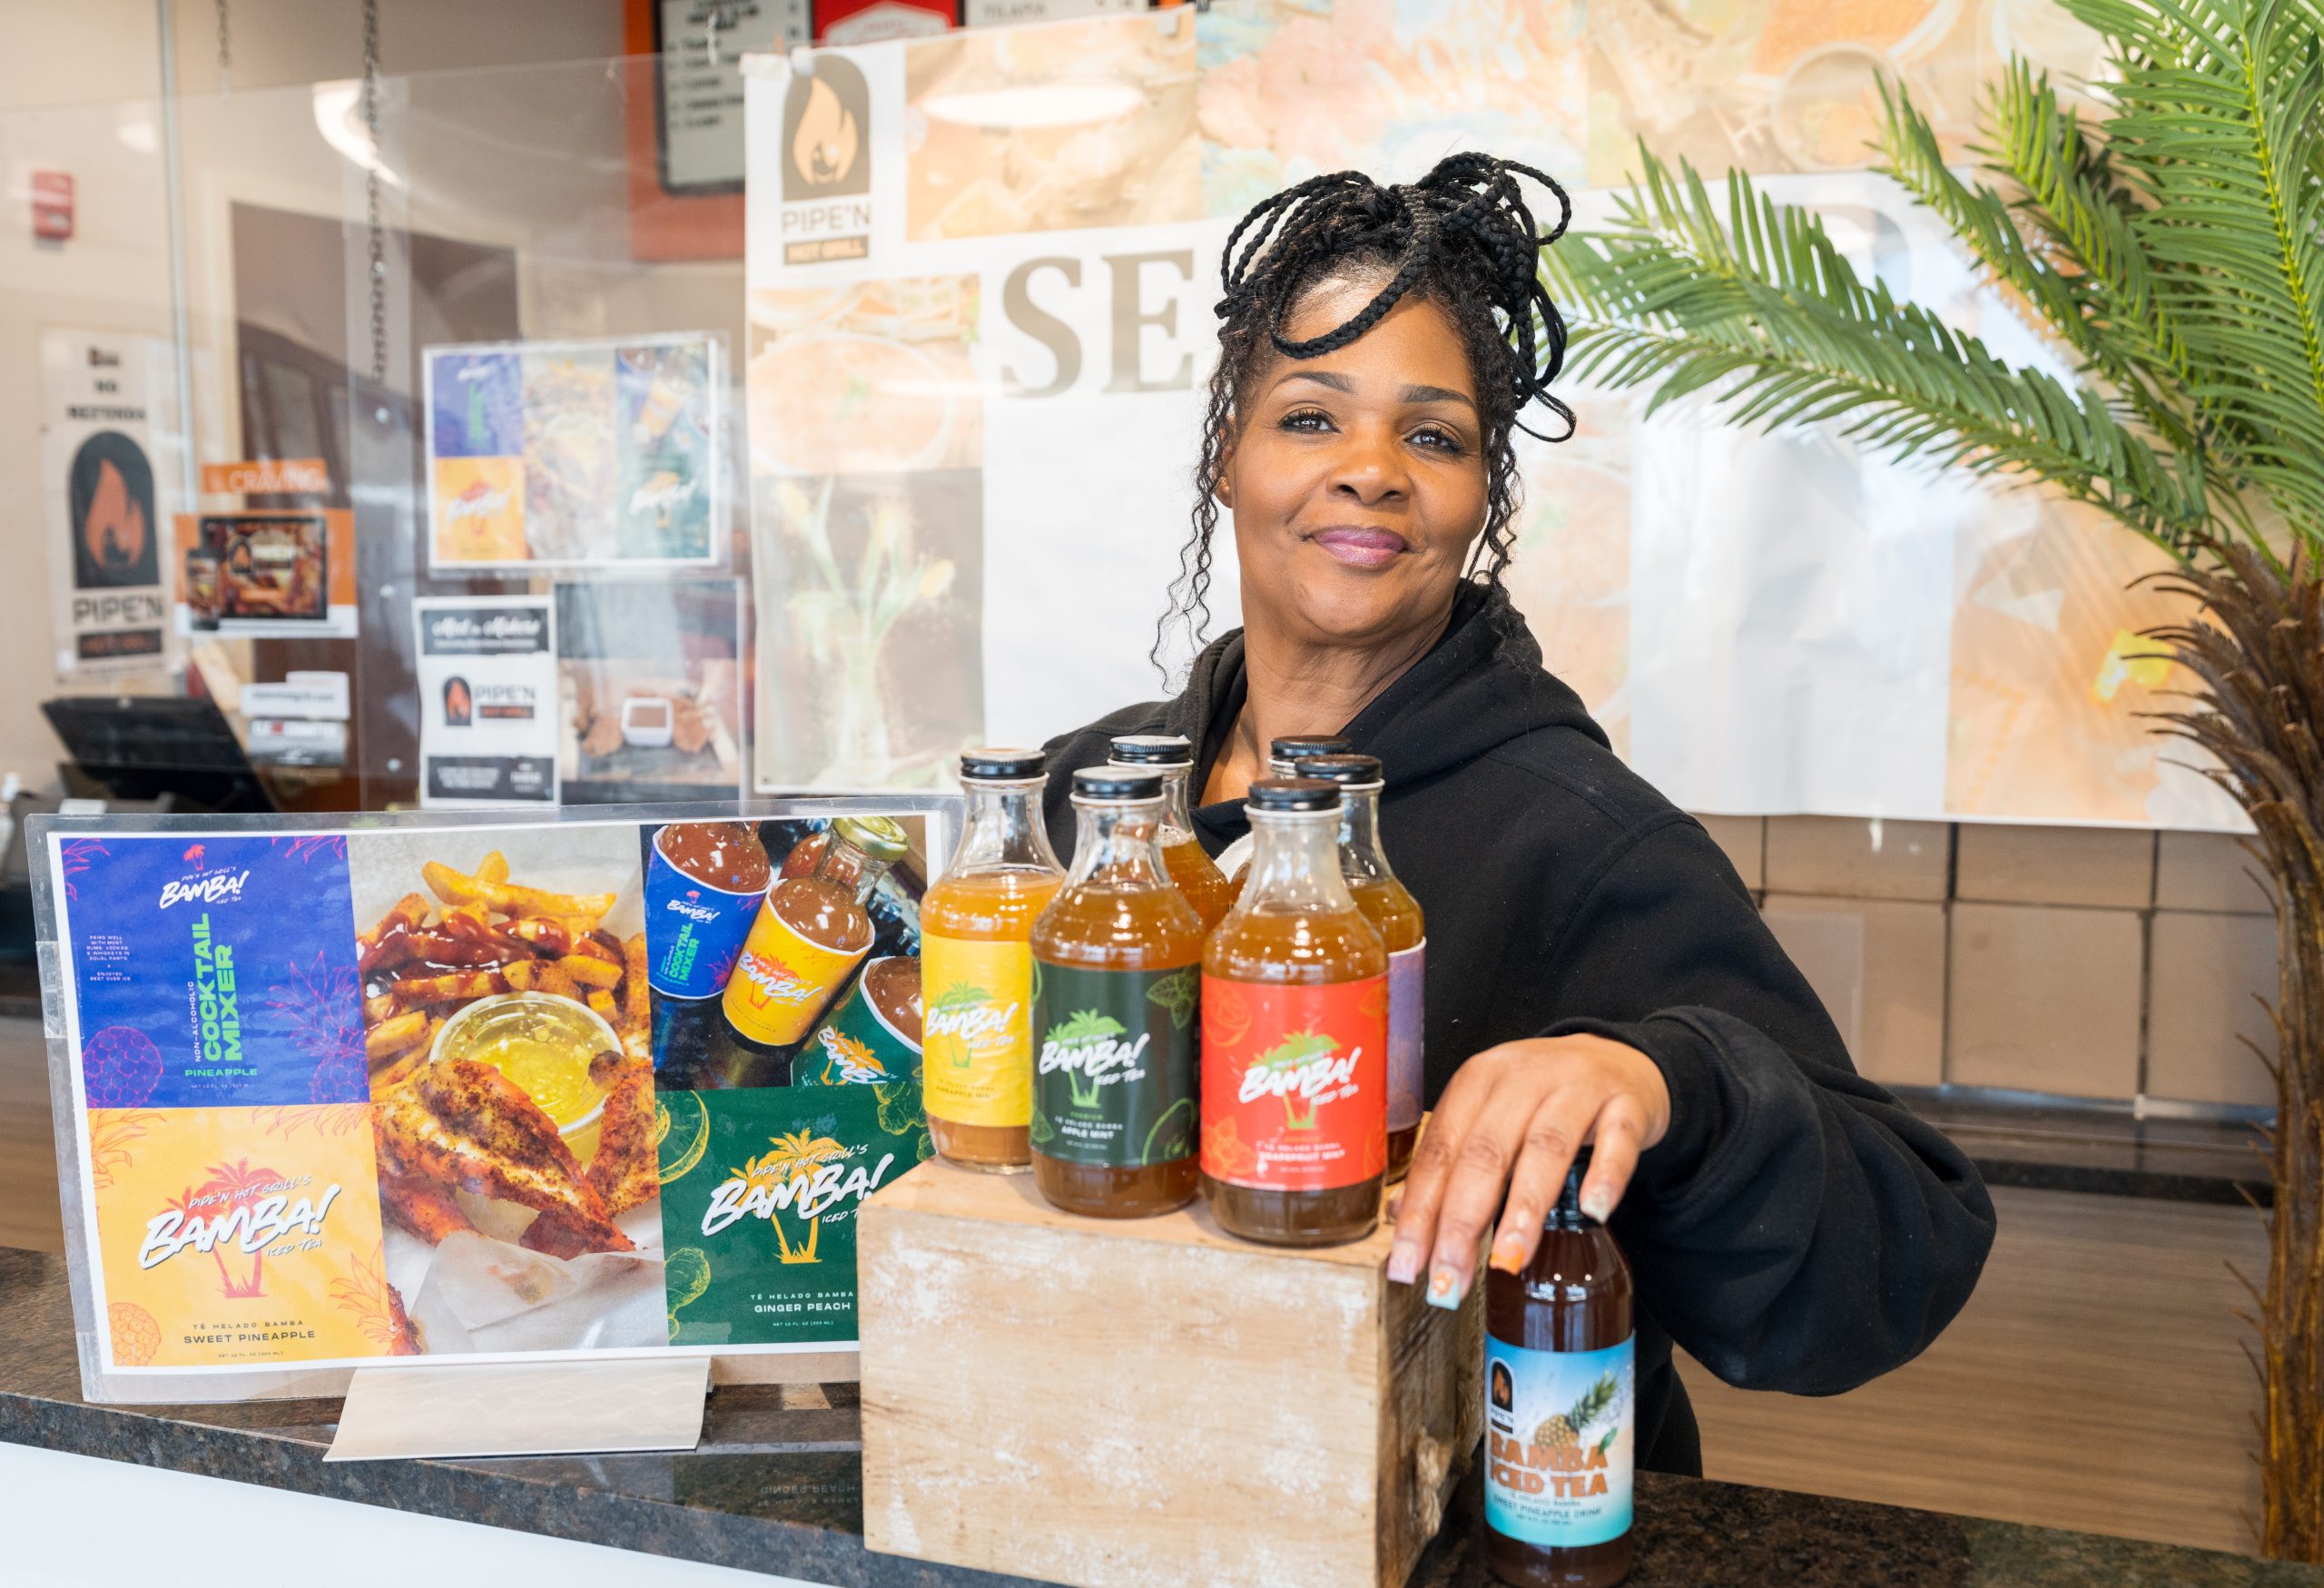 How two businesses got help from Cuyahoga County’s small business program